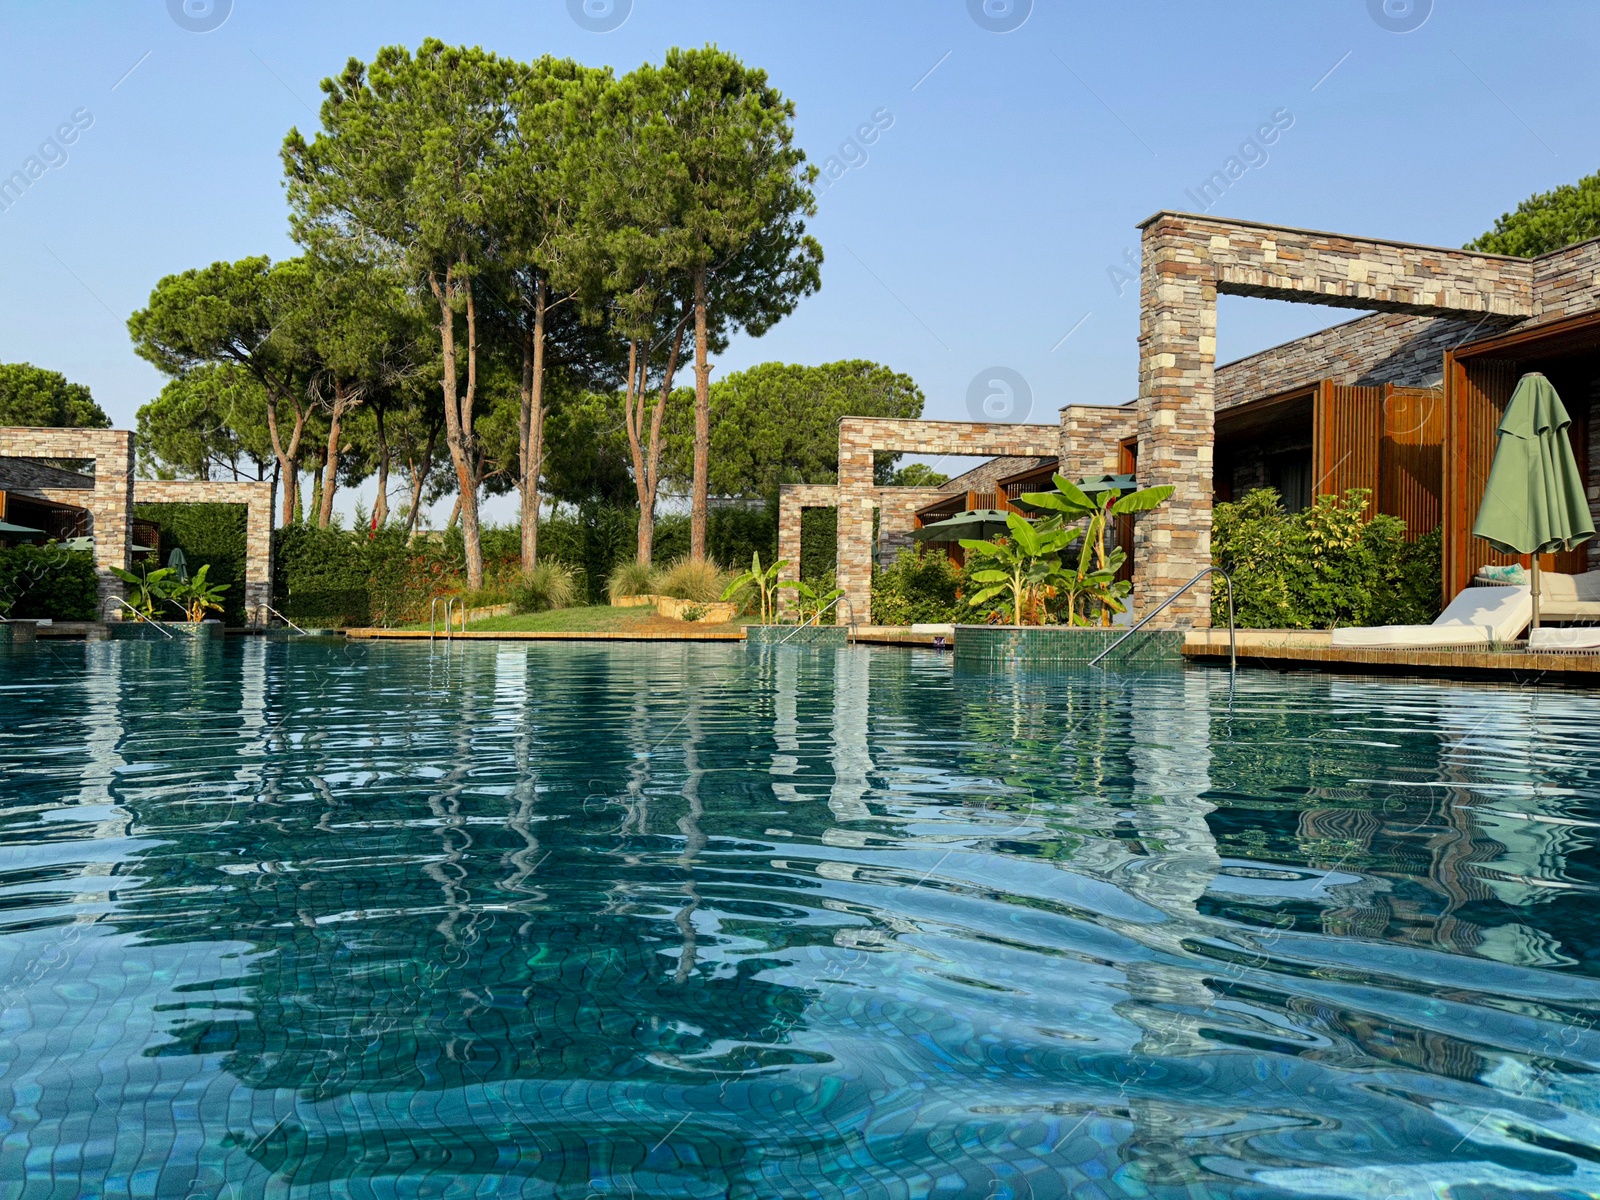 Photo of Swimming pool and exotic plants at luxury resort